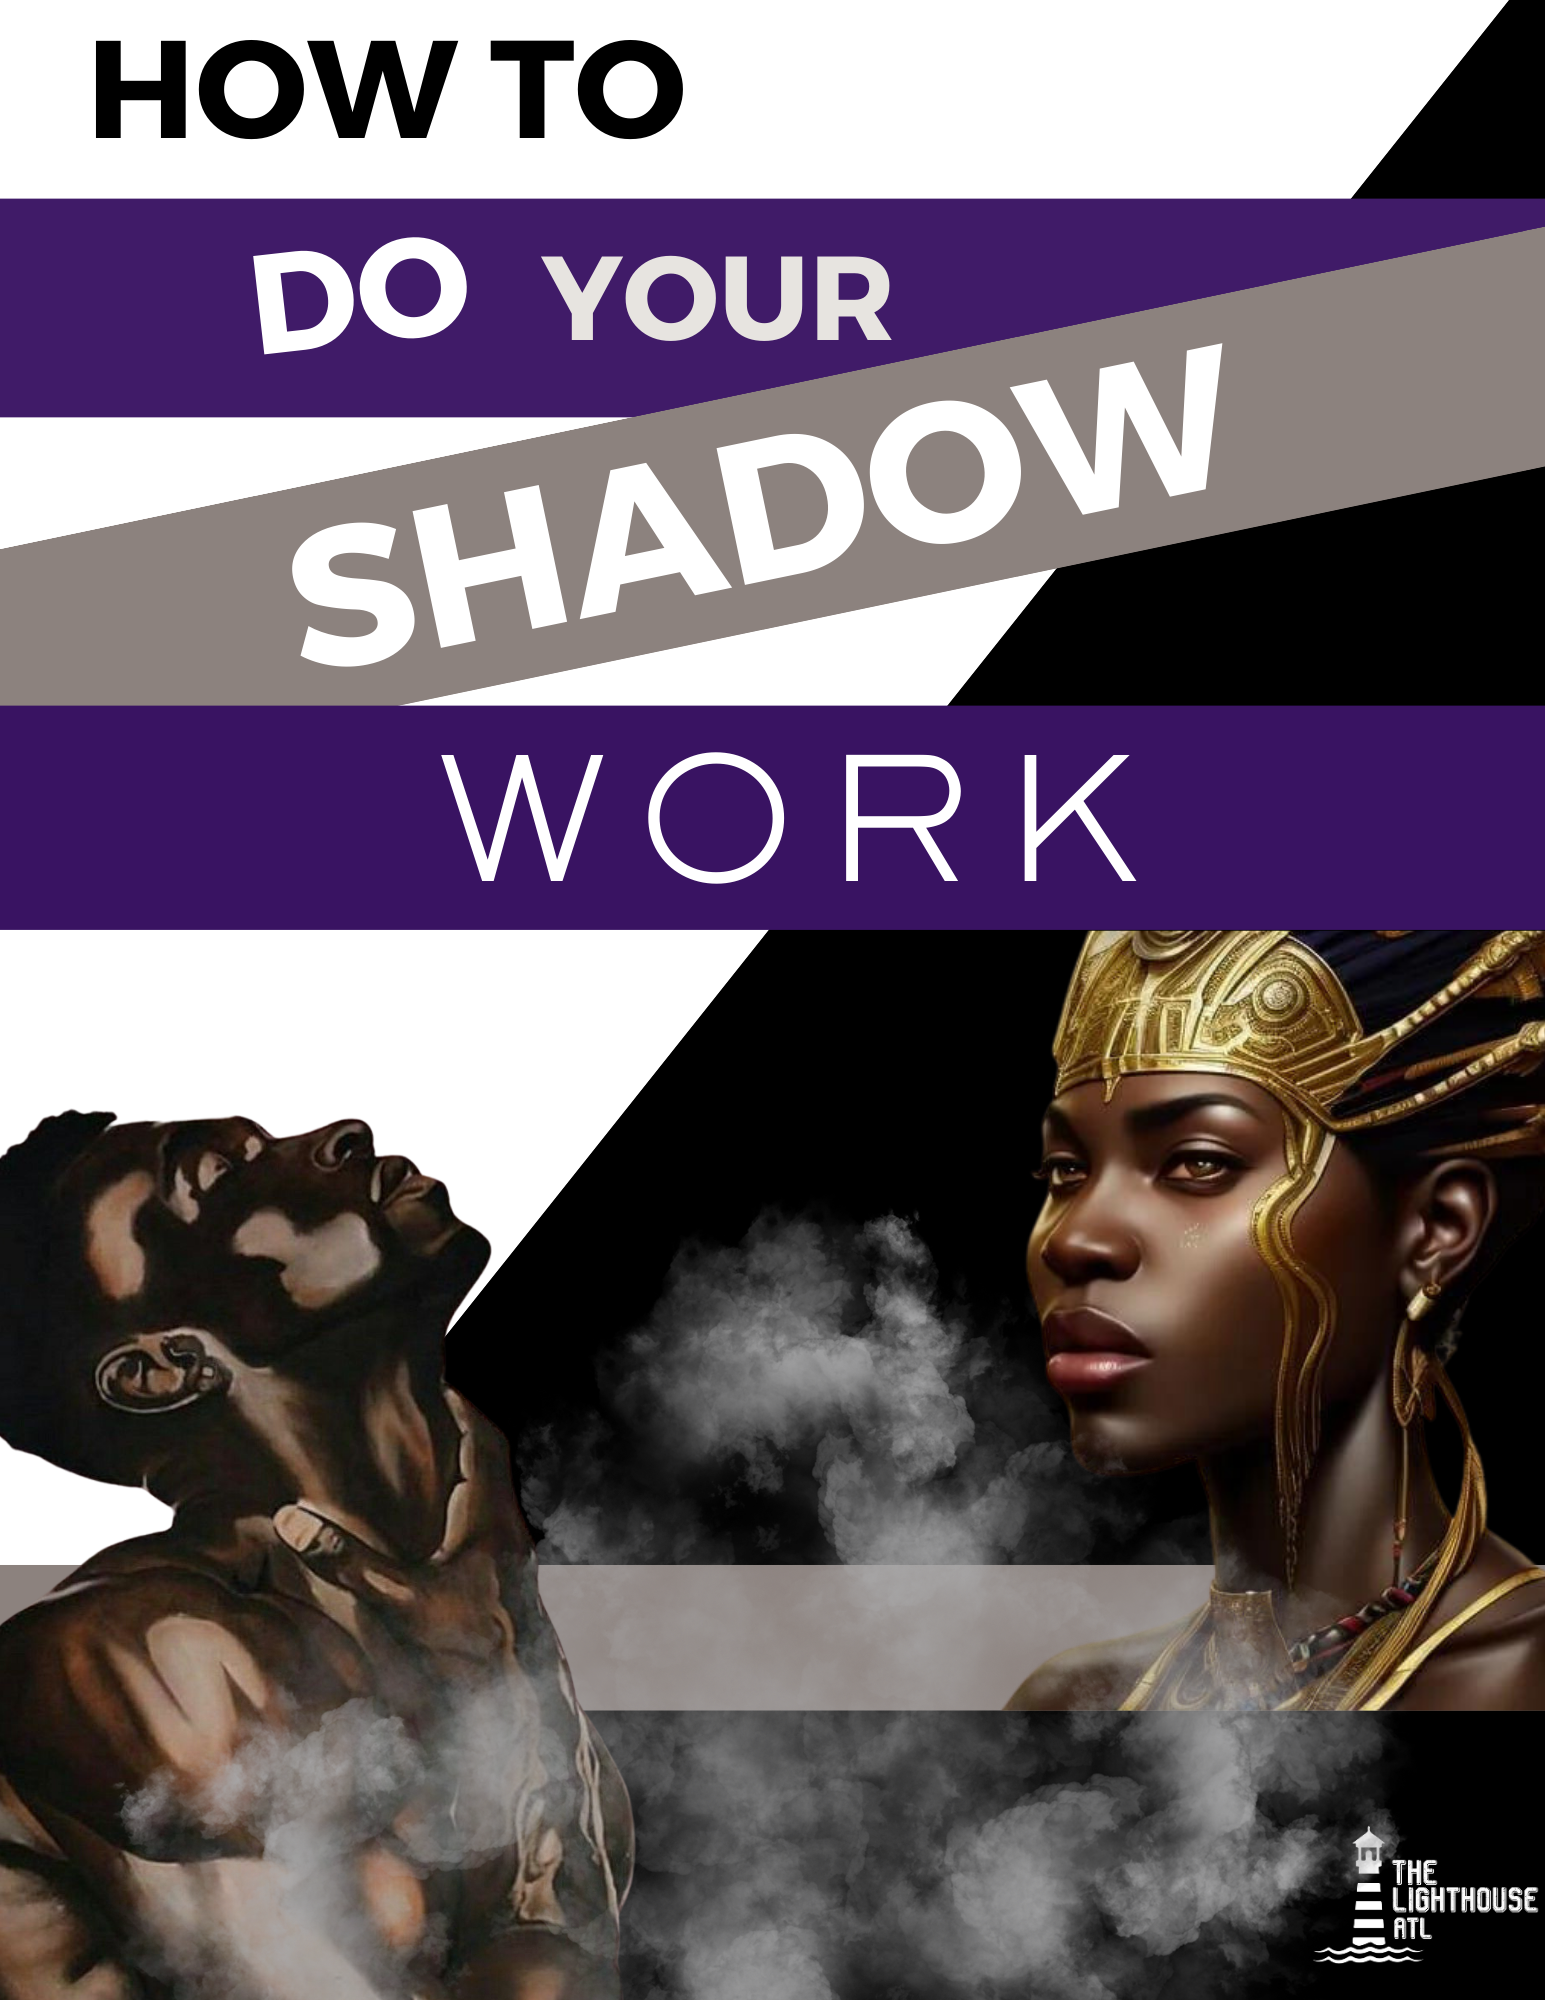 SHADOW WORK GUIDE